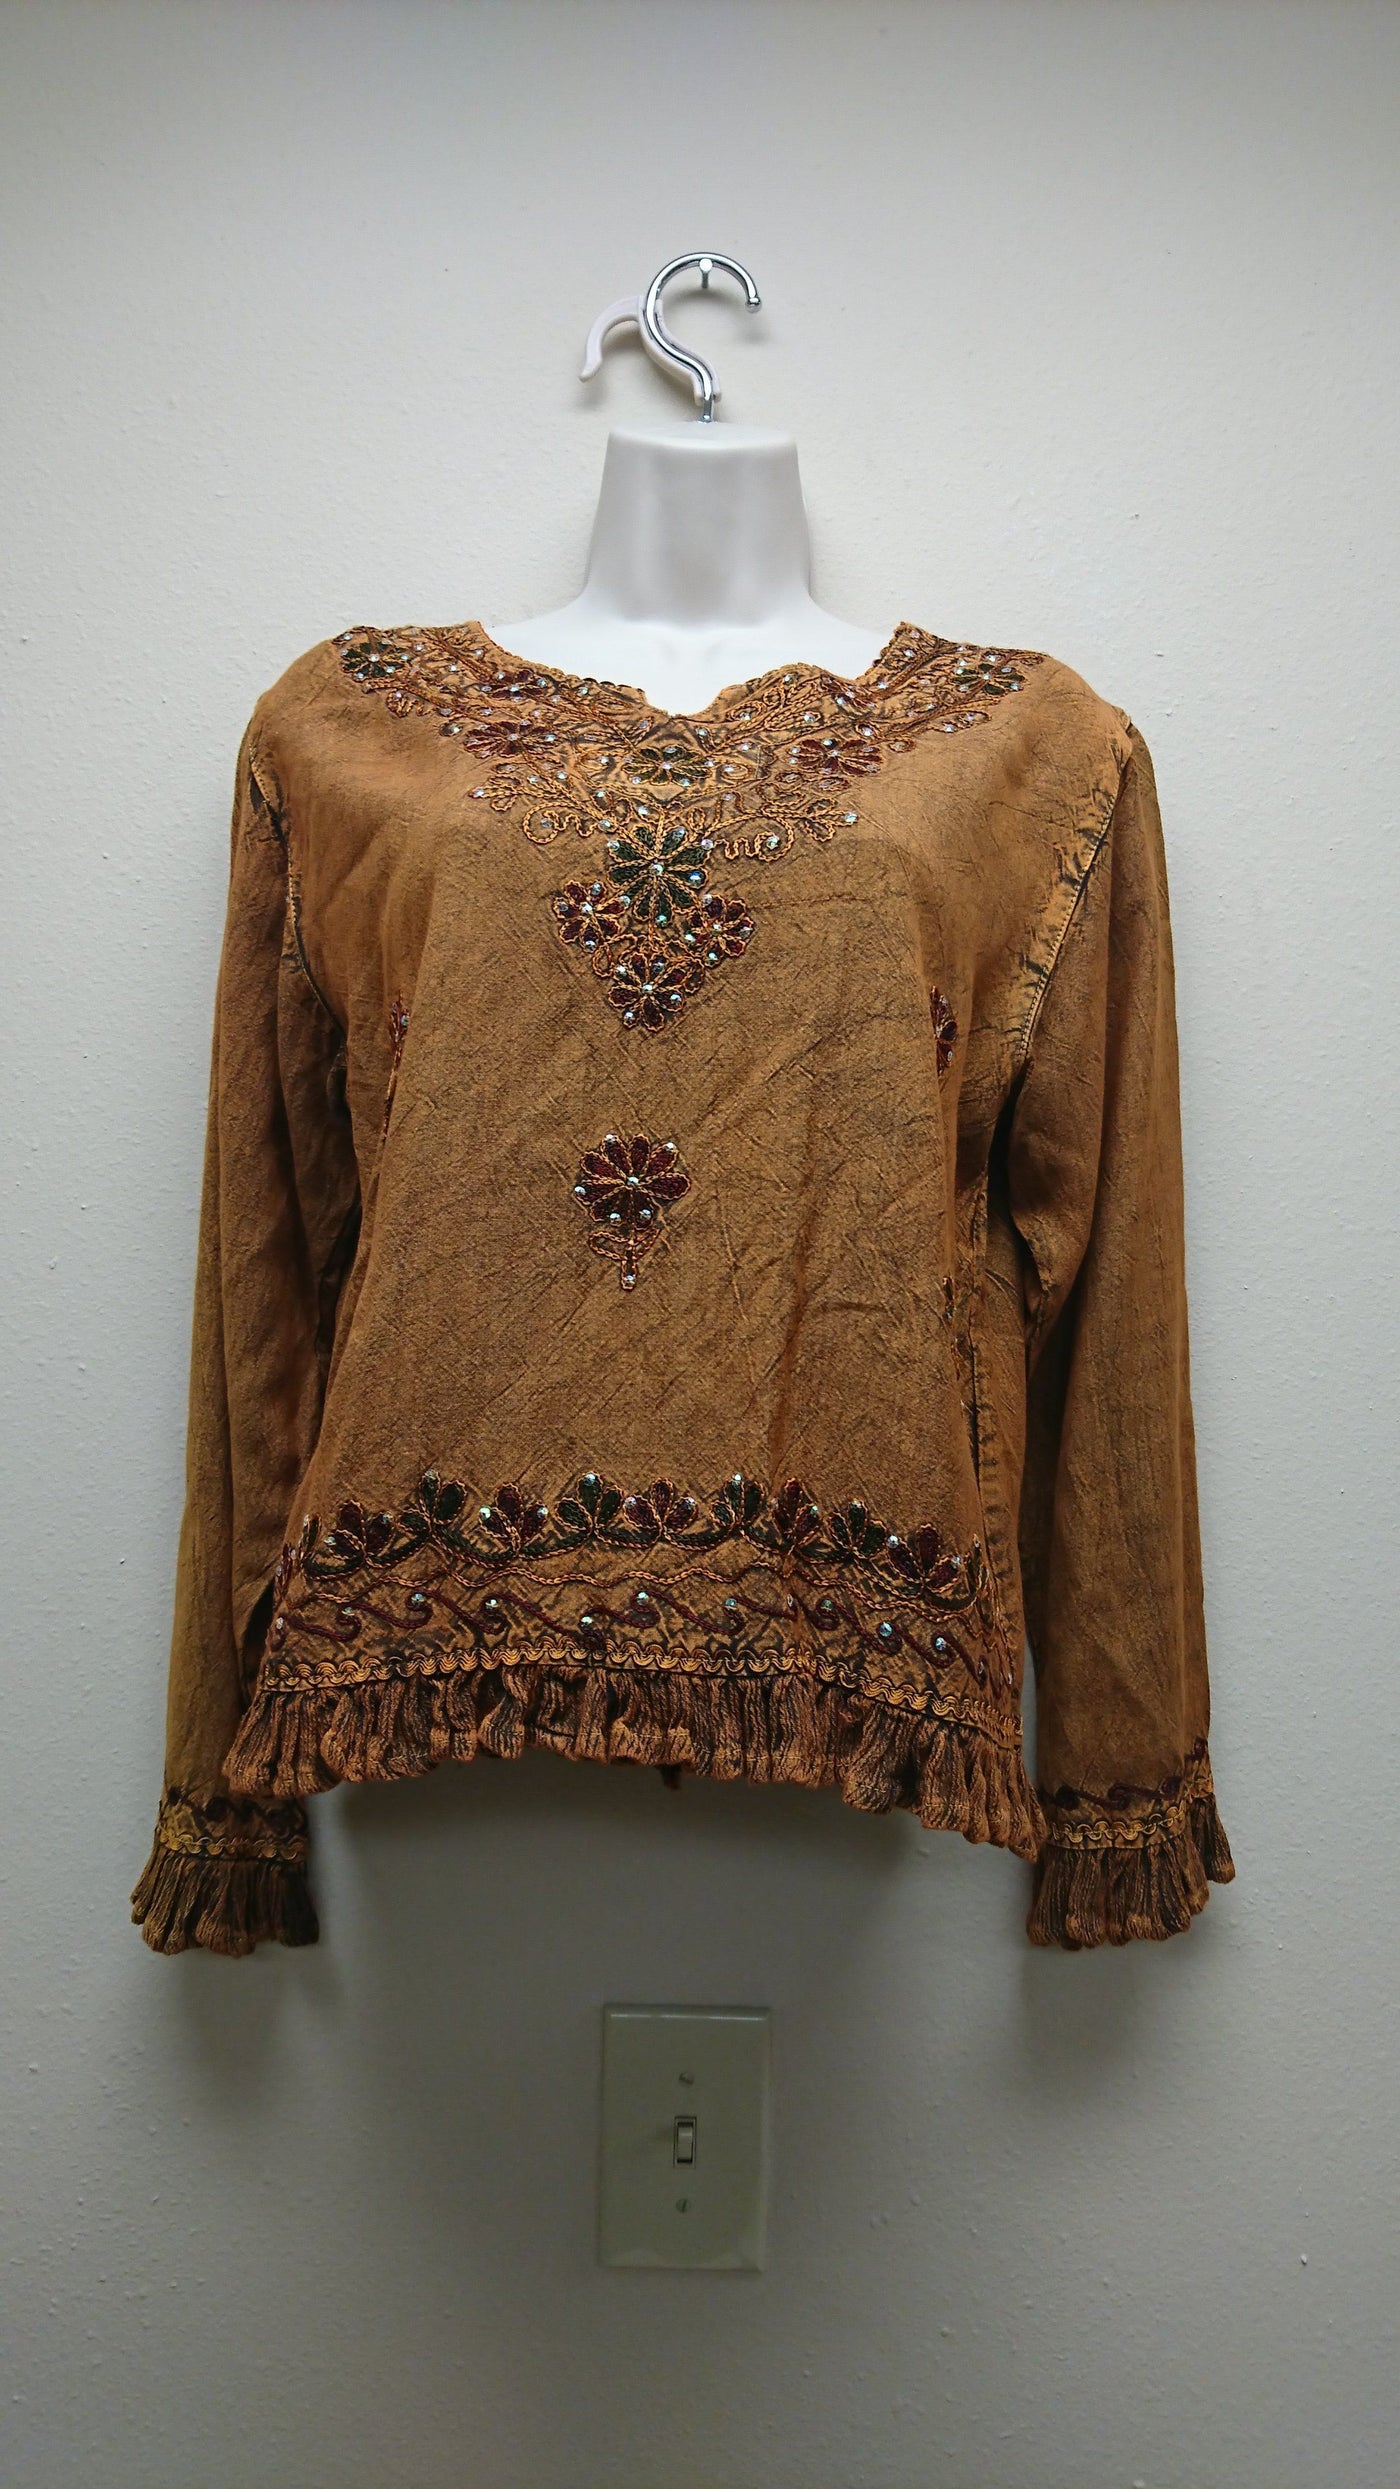 Kurti Blouse Top Light brown - Indian Clothing in Denver, CO, Aurora, CO, Boulder, CO, Fort Collins, CO, Colorado Springs, CO, Parker, CO, Highlands Ranch, CO, Cherry Creek, CO, Centennial, CO, and Longmont, CO. Nationwide shipping USA - India Fashion X